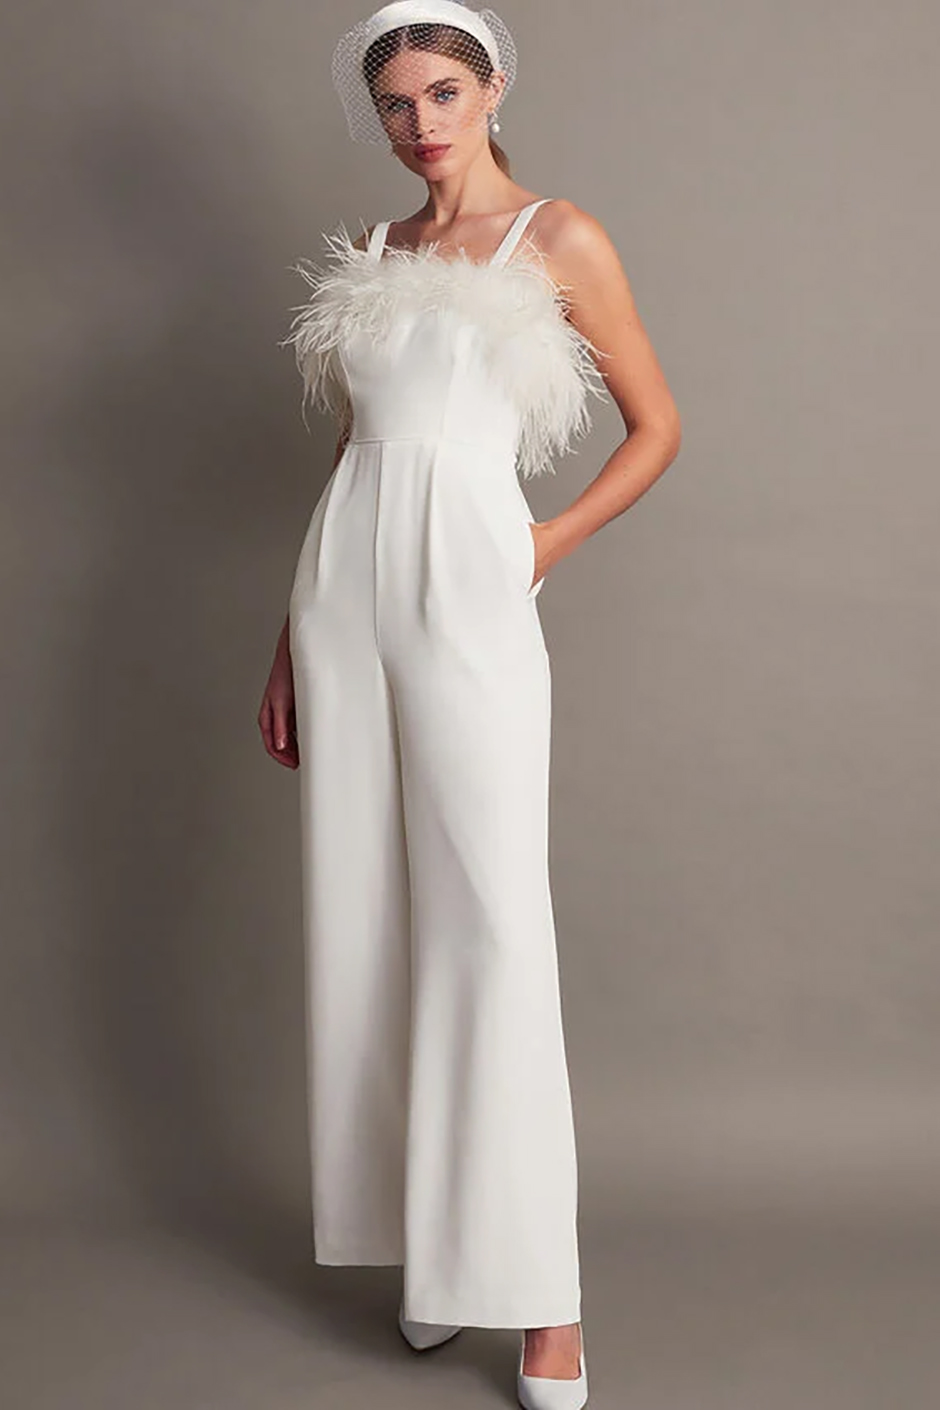 Wide leg bridal jumpsuit with pockets and feather trimmed neckline from Monsoon